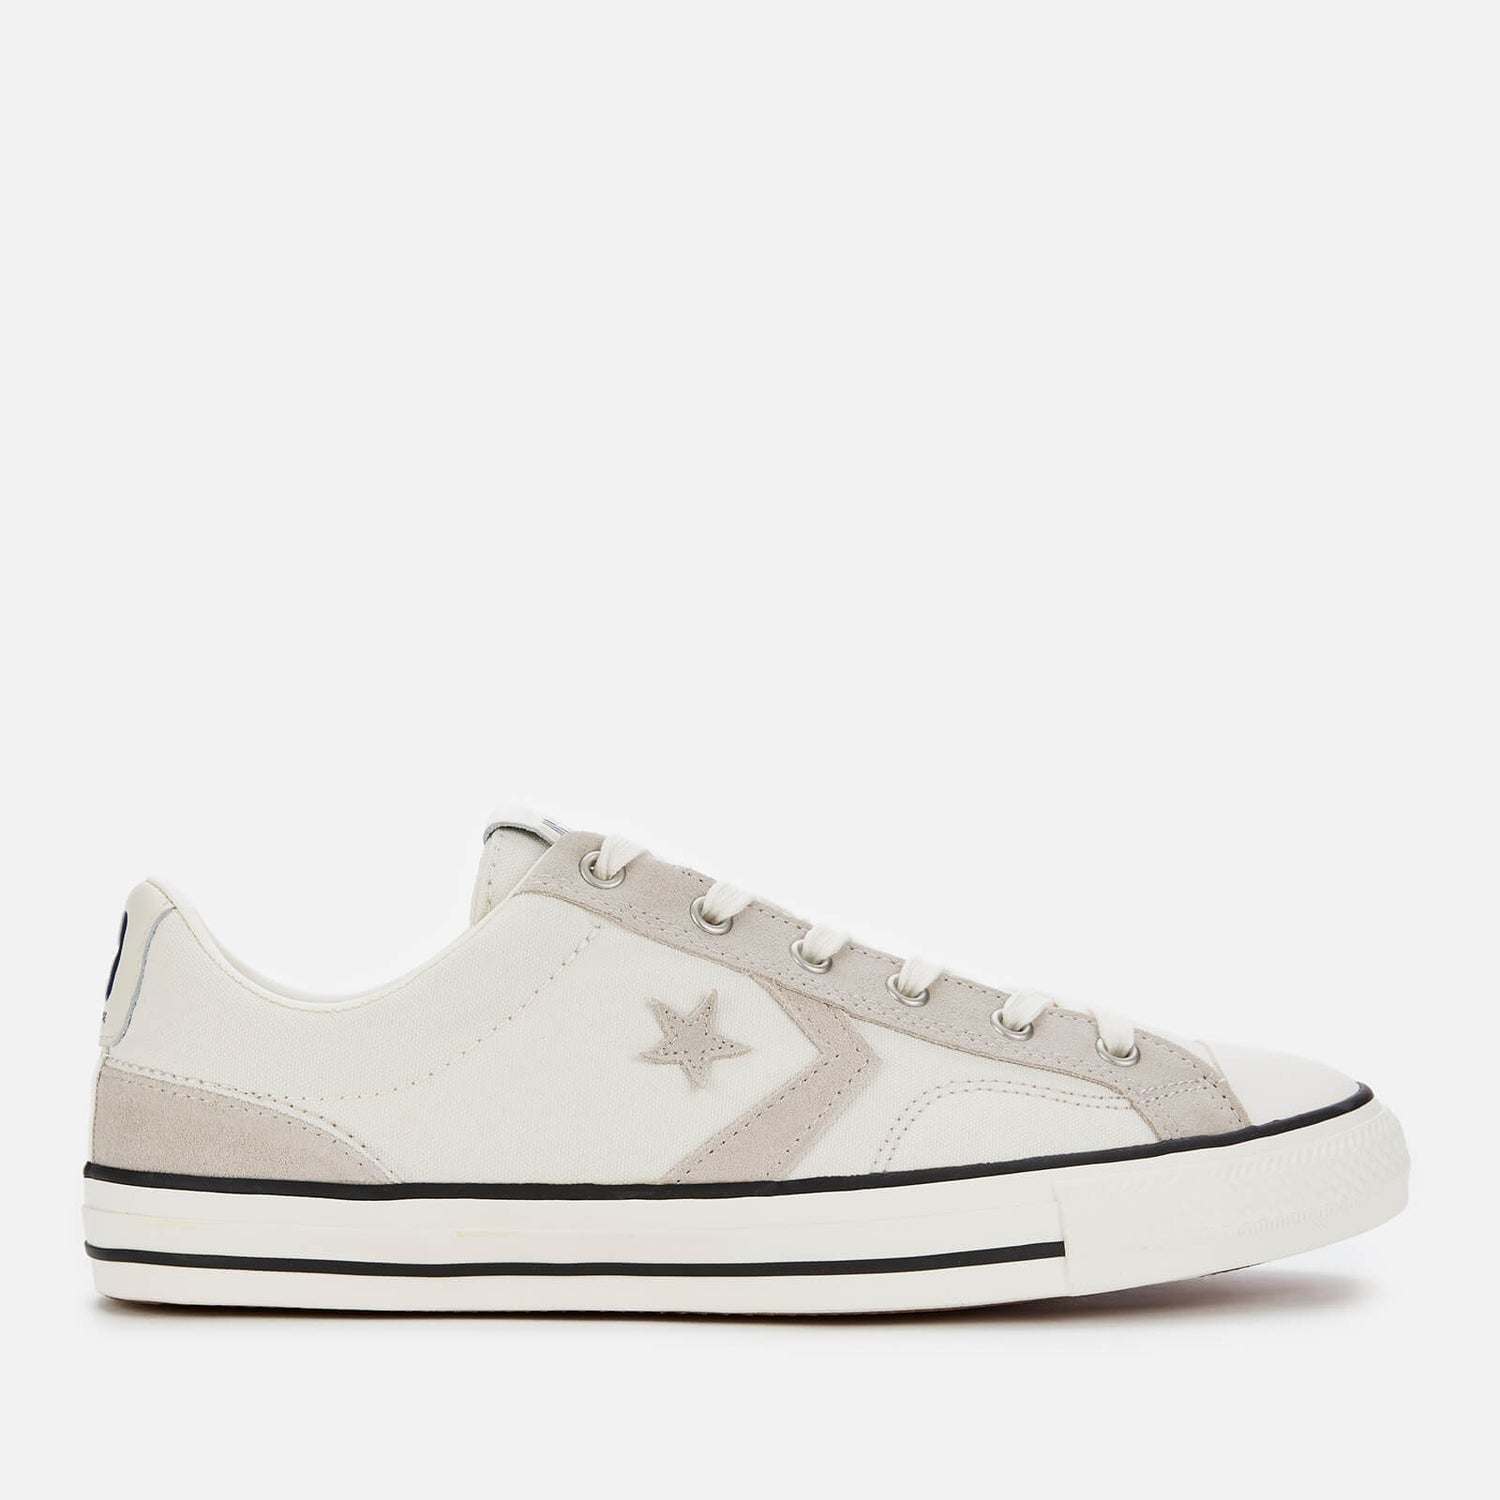 Converse Men's Canvas/Suede Star Player Ox Trainers - Vaporous Grey